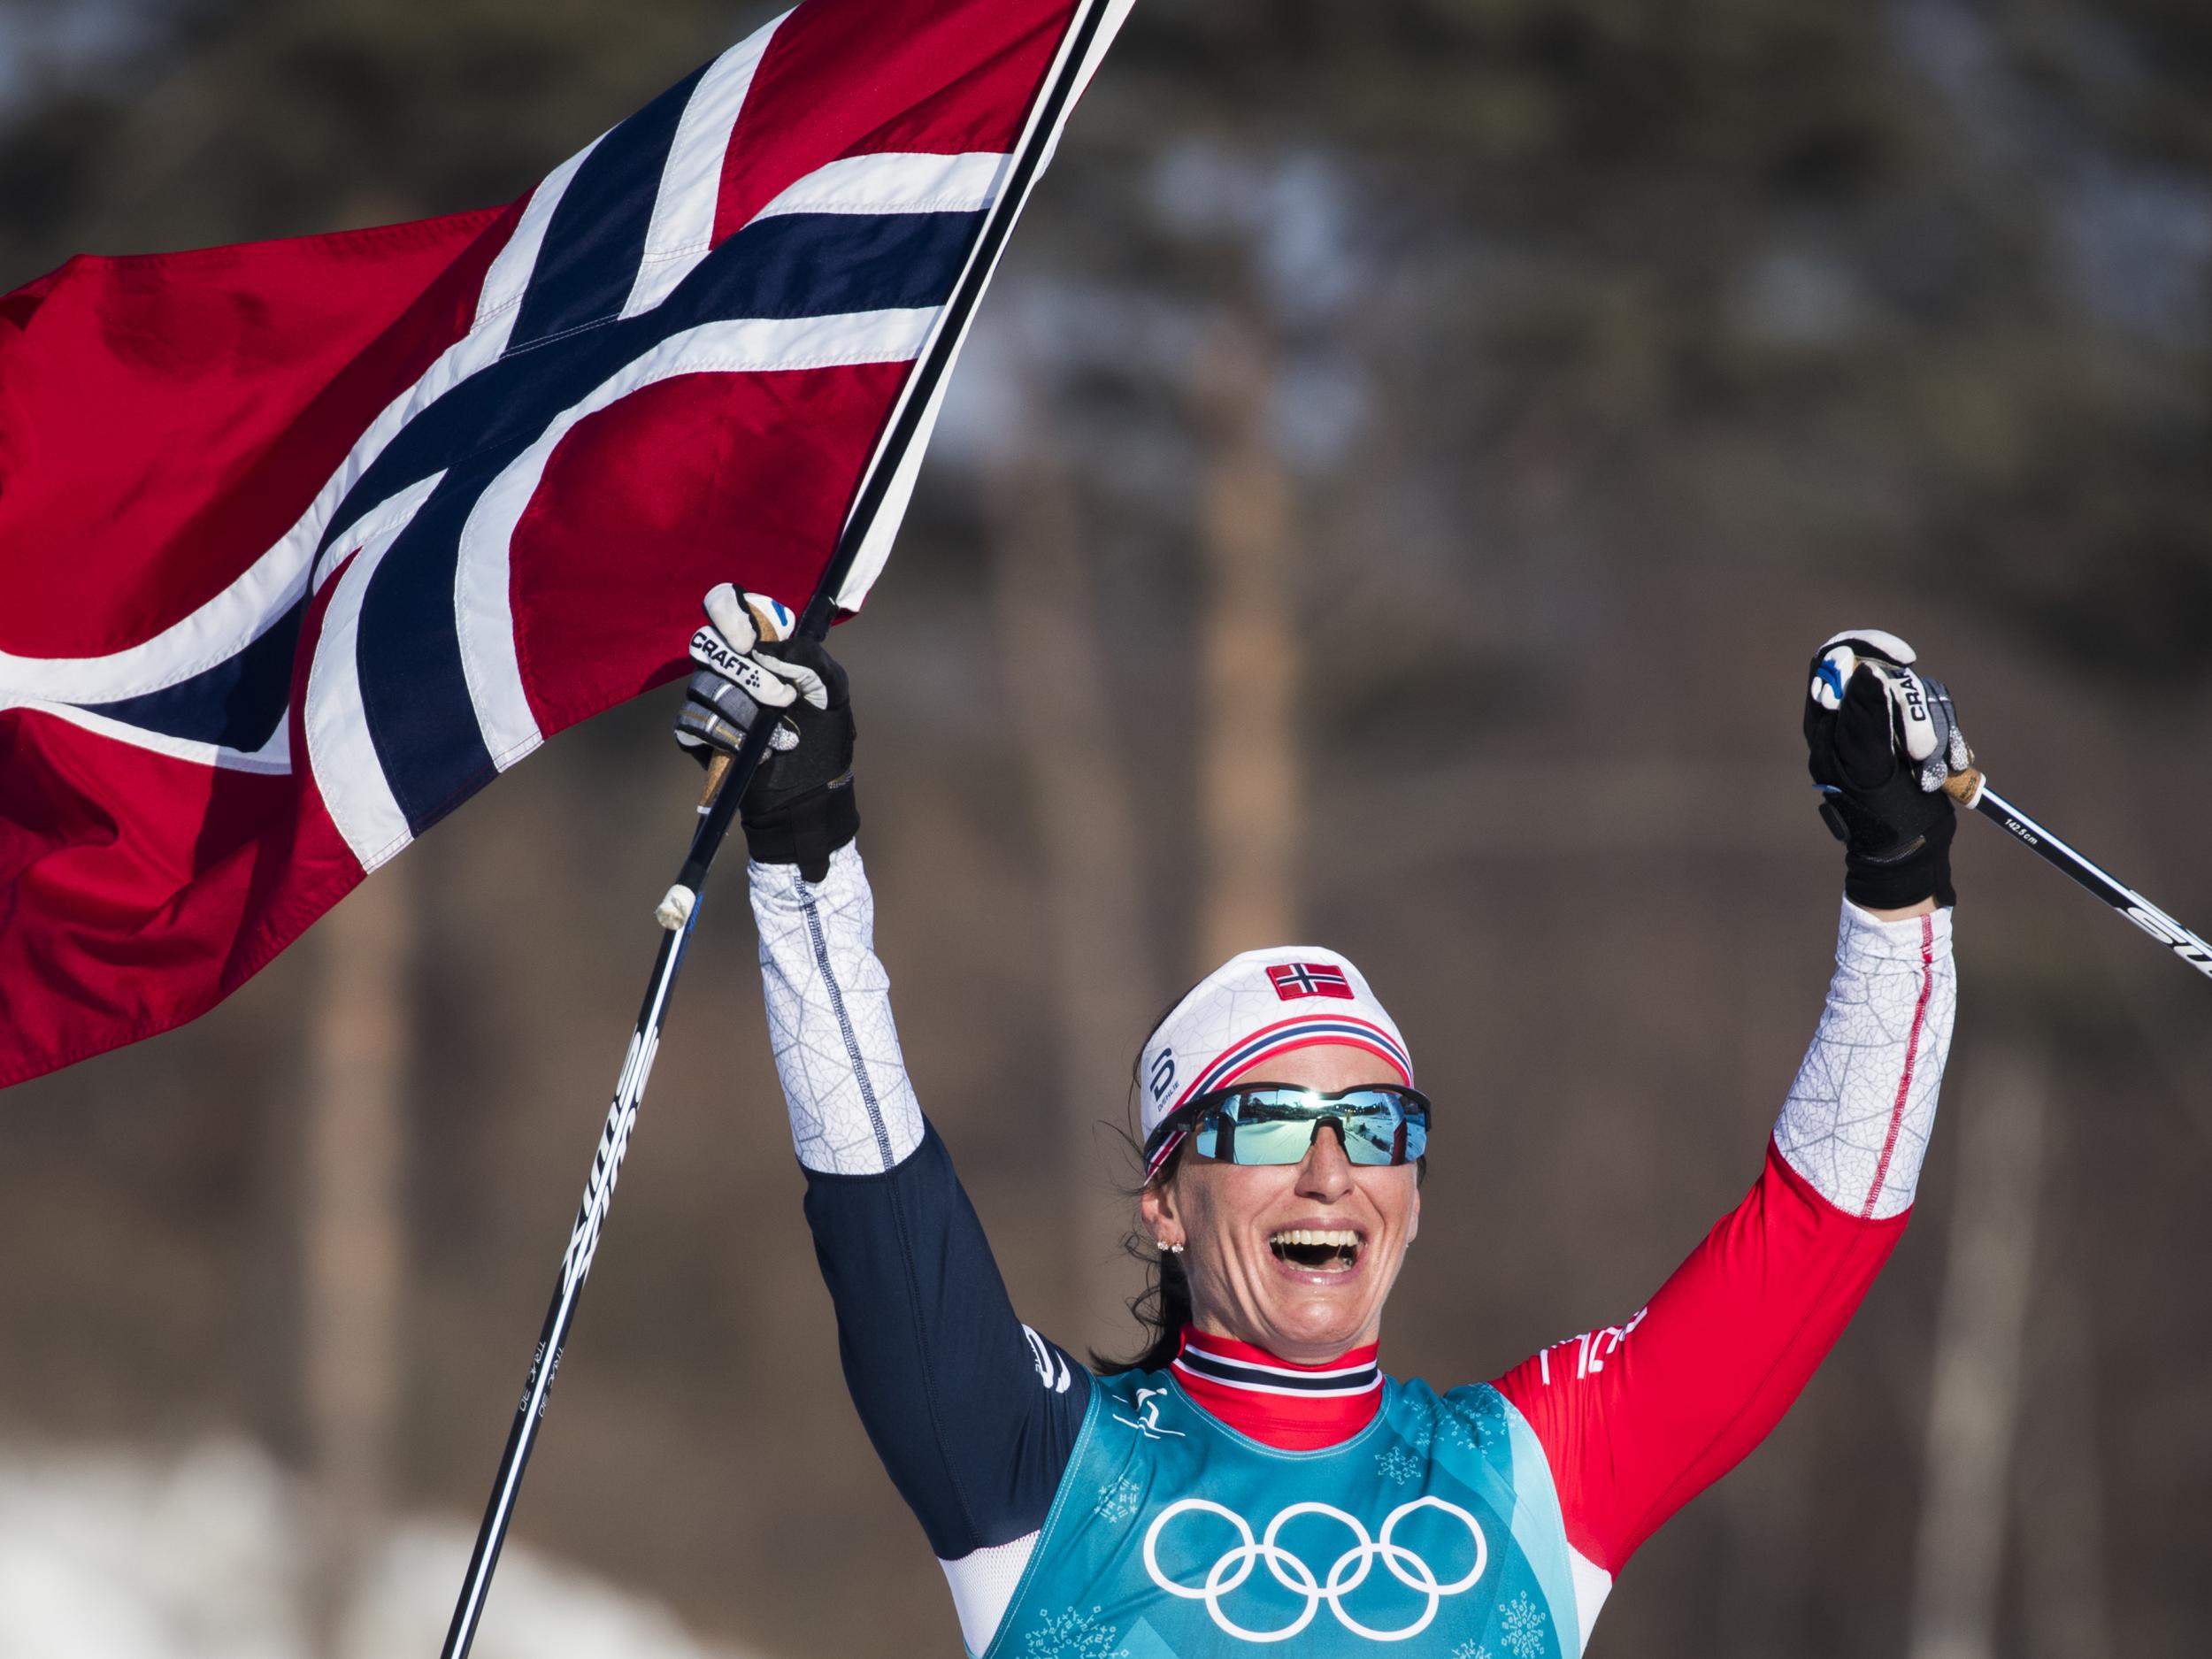 Marit Bjorgen won the final gold medal of the 2018 Games